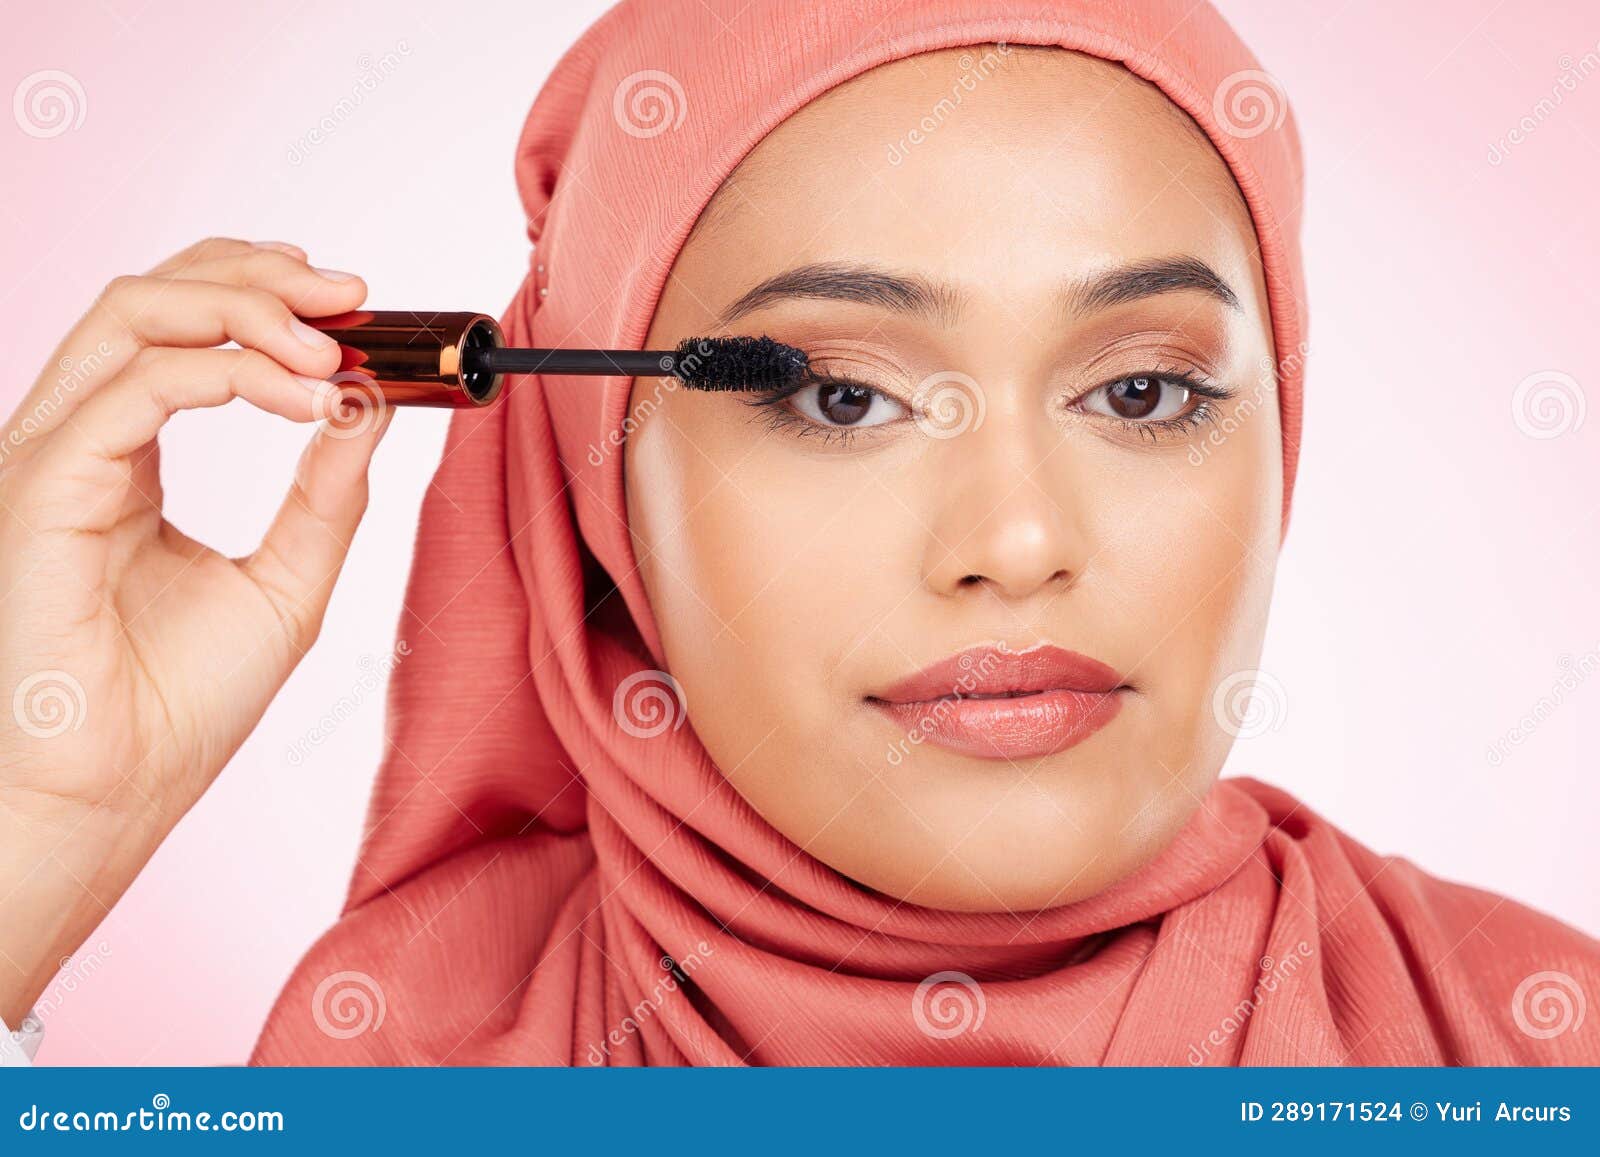 mascara brush, portrait or islamic woman with studio cosmetic tools, skincare or grooming facial lashes. eyelash product